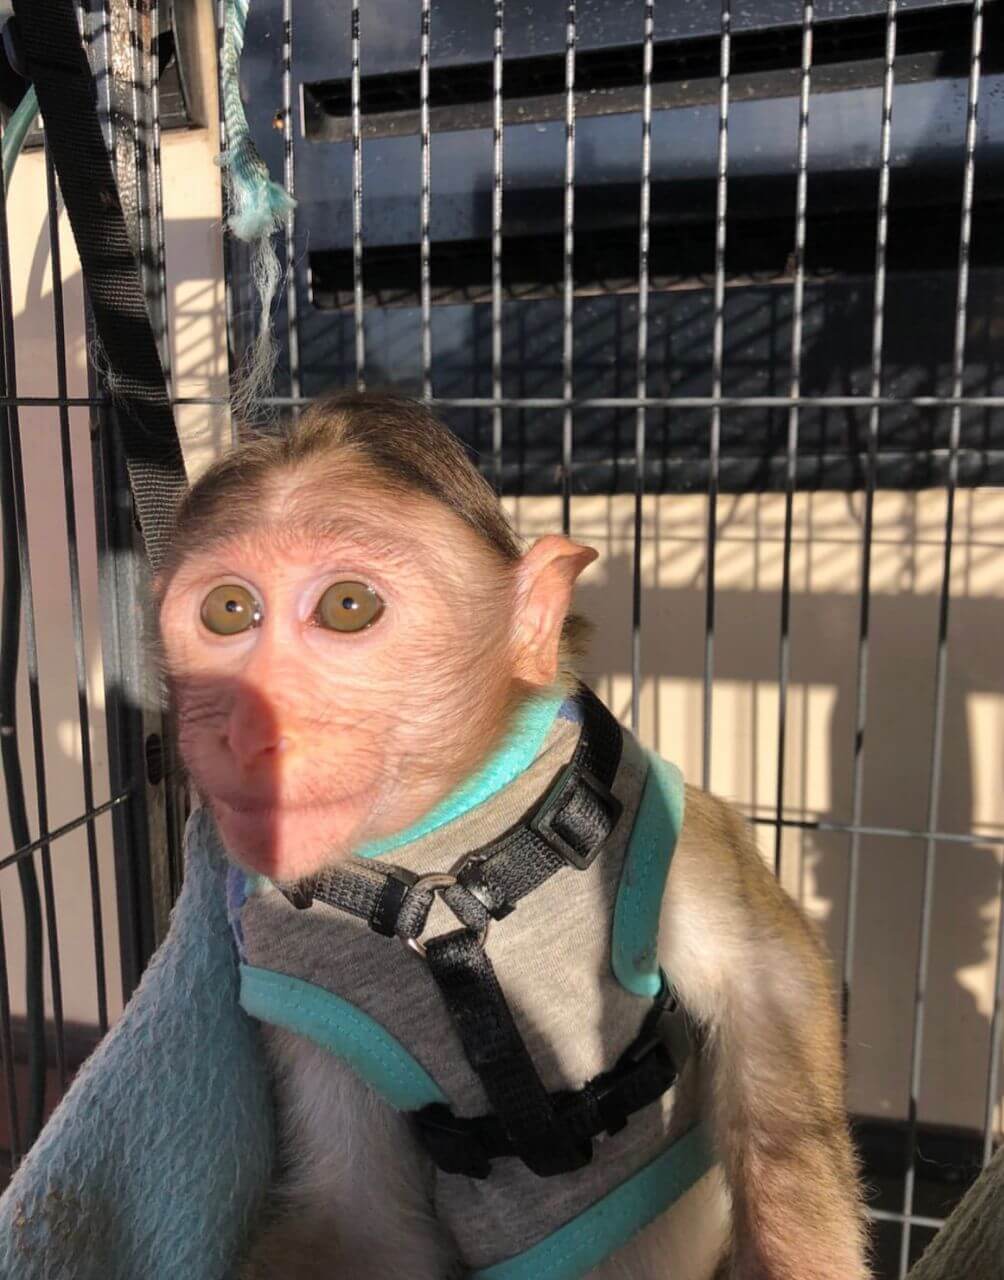 our shop is the ideal place to get Macaque Monkey For Sale. Buy Macaque Monkeys, macaque monkey breeders, macaque monkey pet, baby macaque monkey for sale